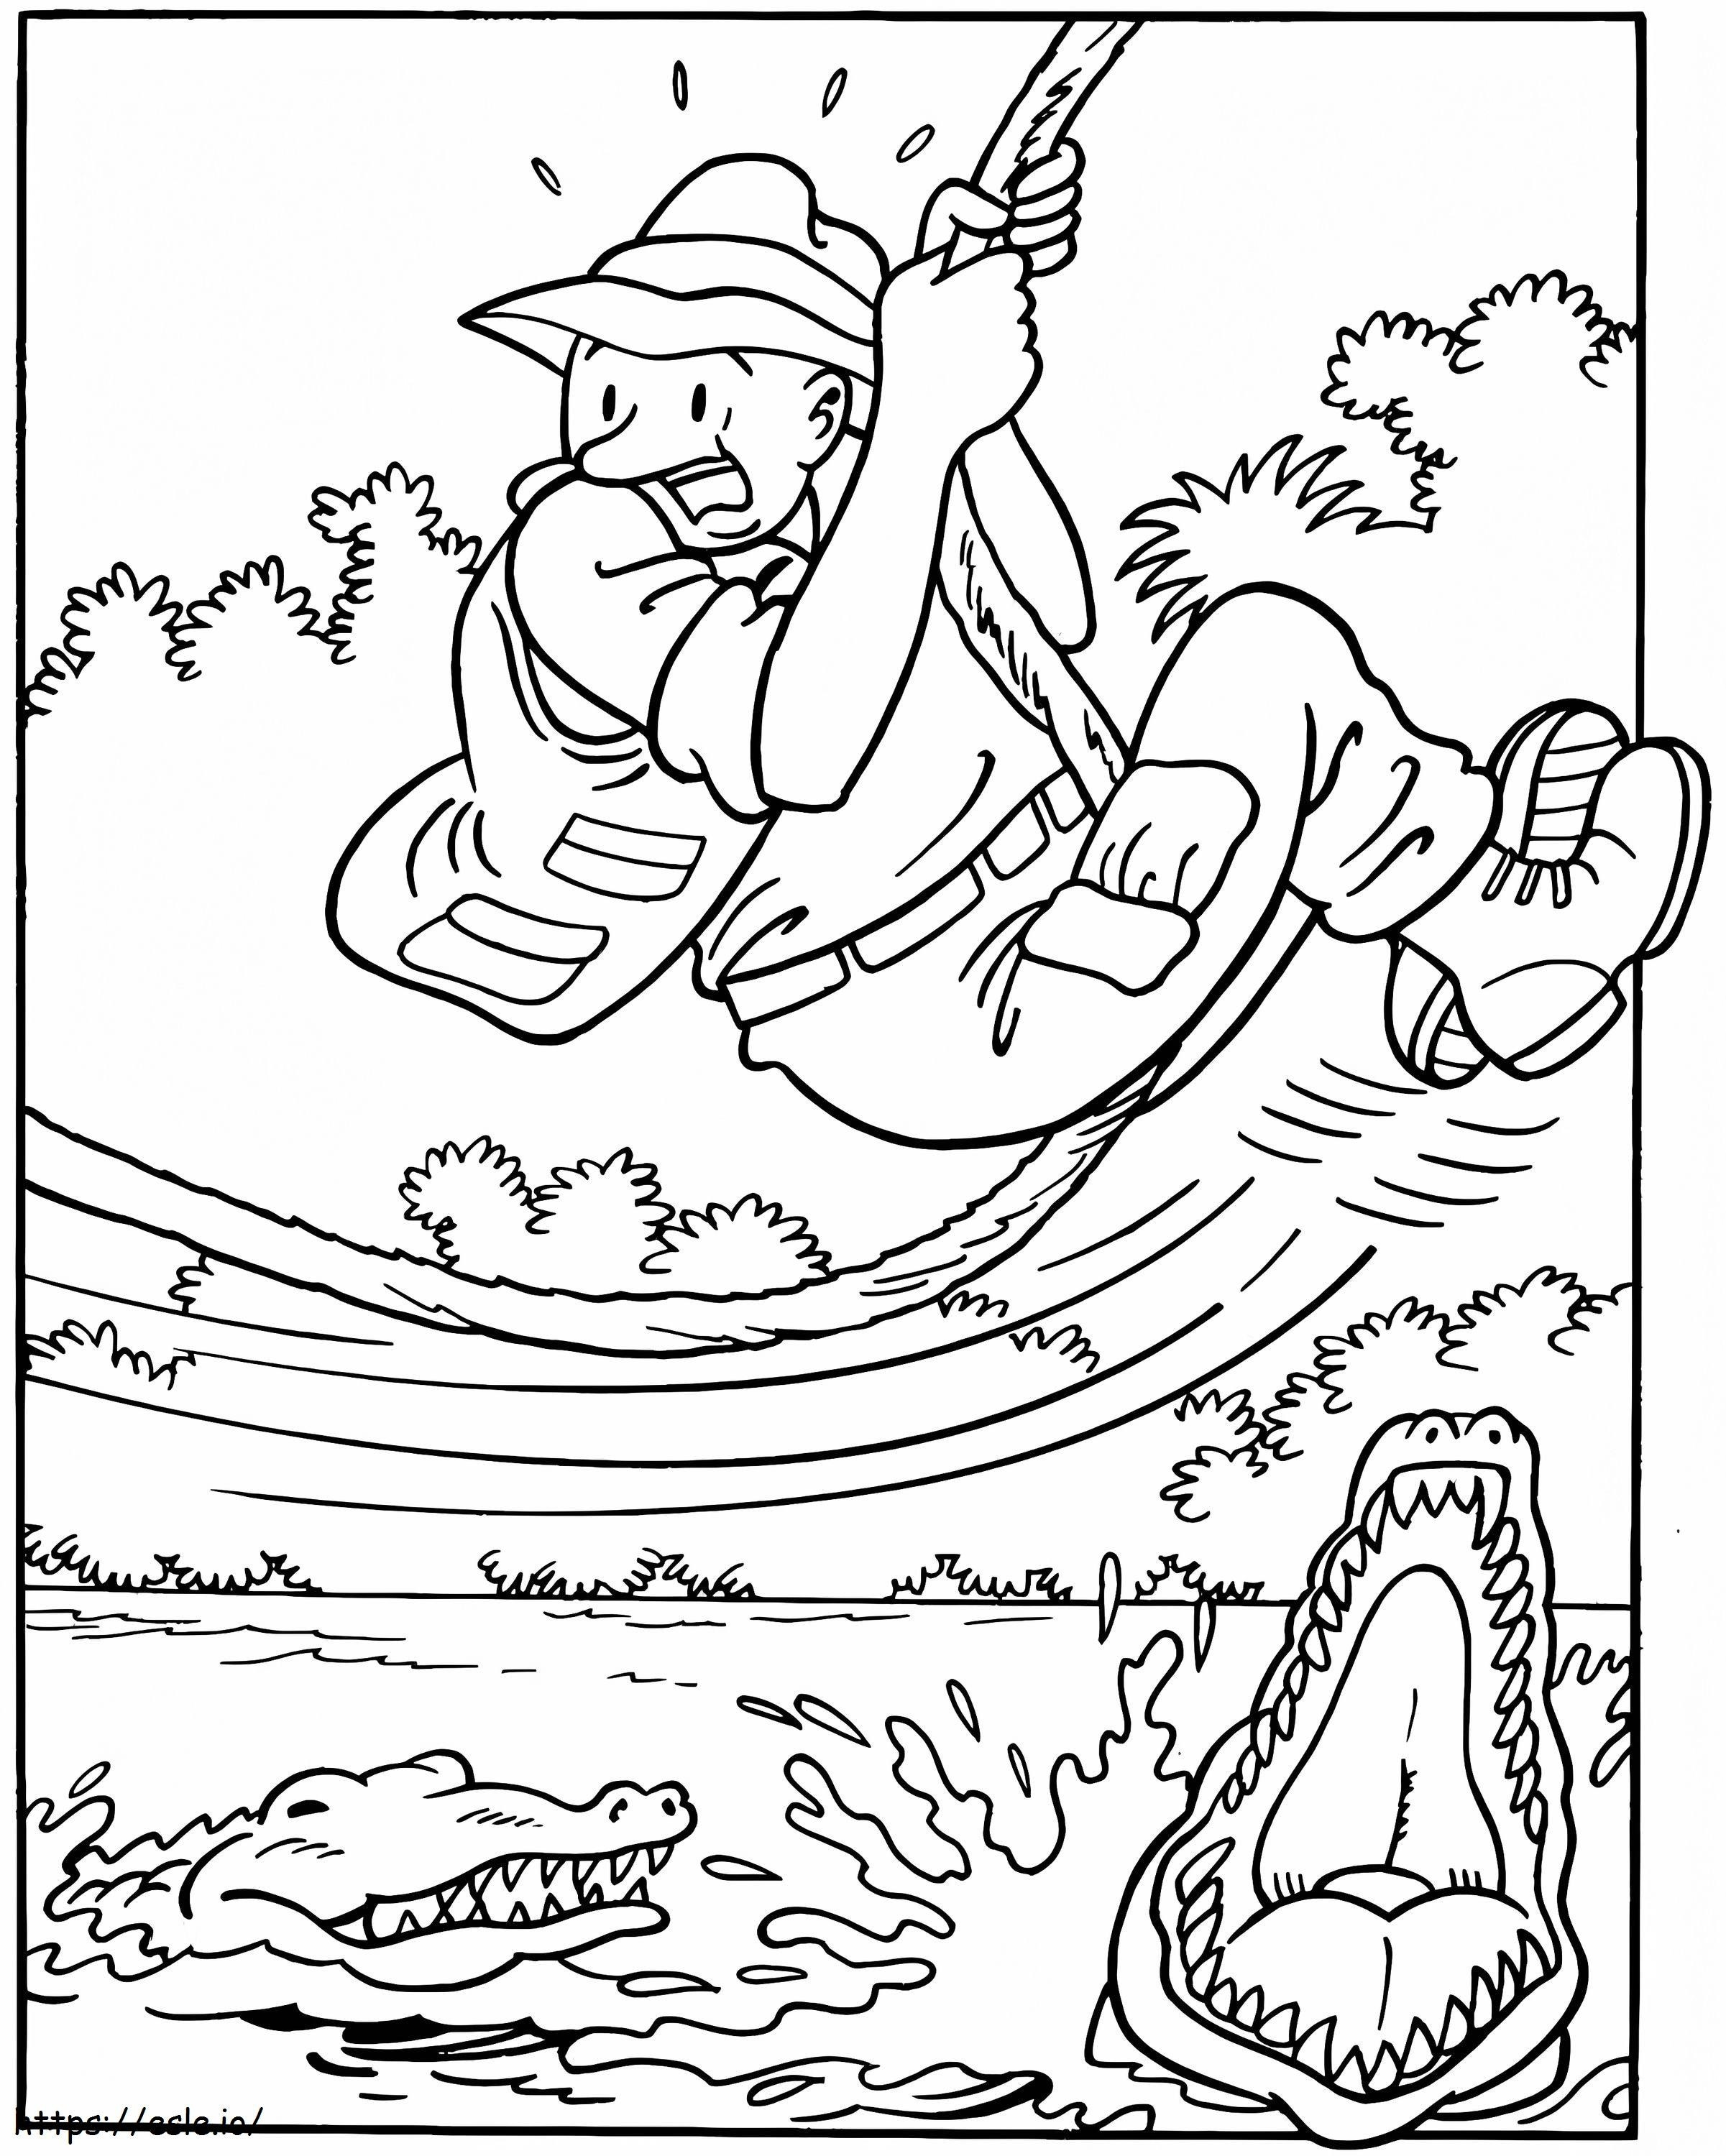 Spike And Suzy 9 coloring page